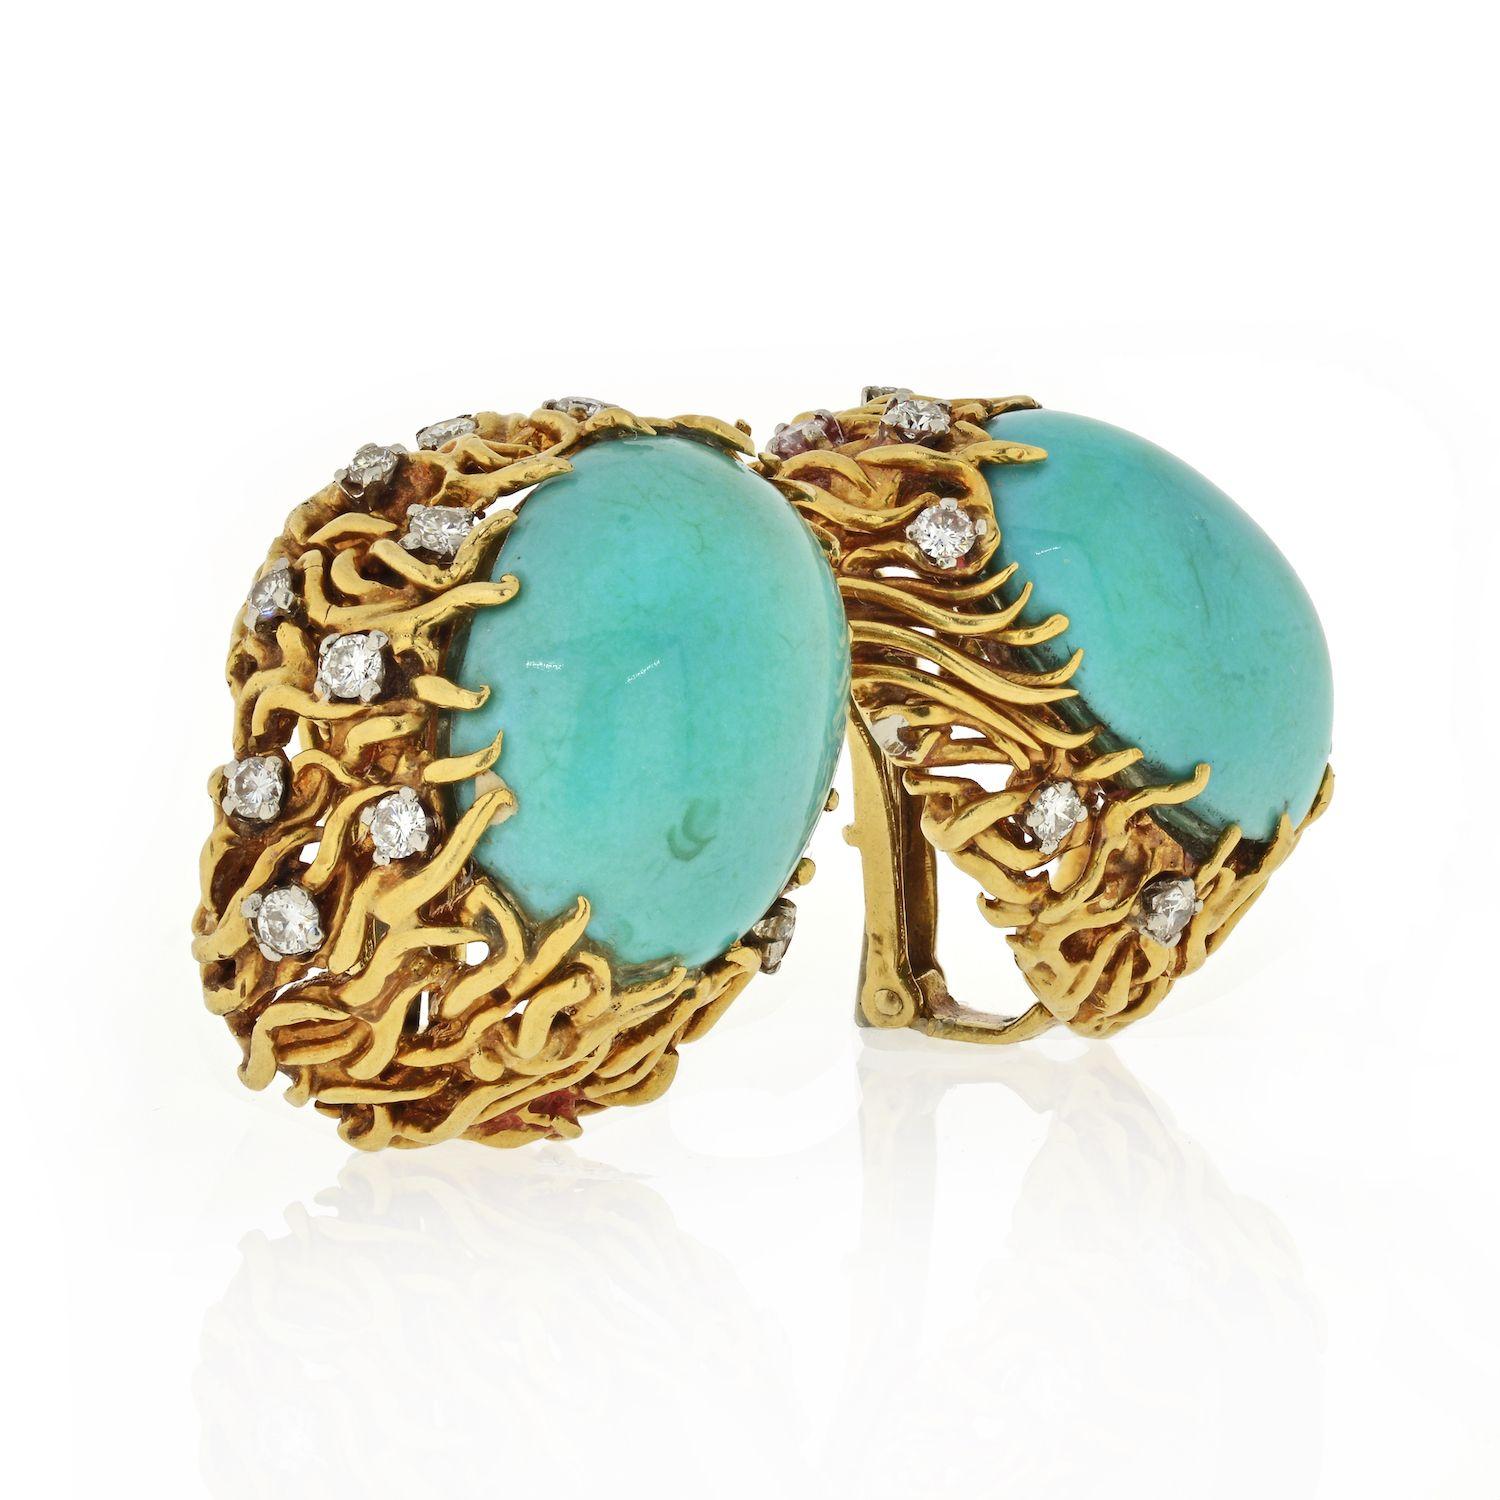 David Webb turquoise and diamond earrings in 18 karat yellow gold with stylized branch design. These clip-on earrings feature 2 oval cabochons and 24 round brilliant diamonds, which total approximately 0.80 carats in total diamond weight. 
Circa